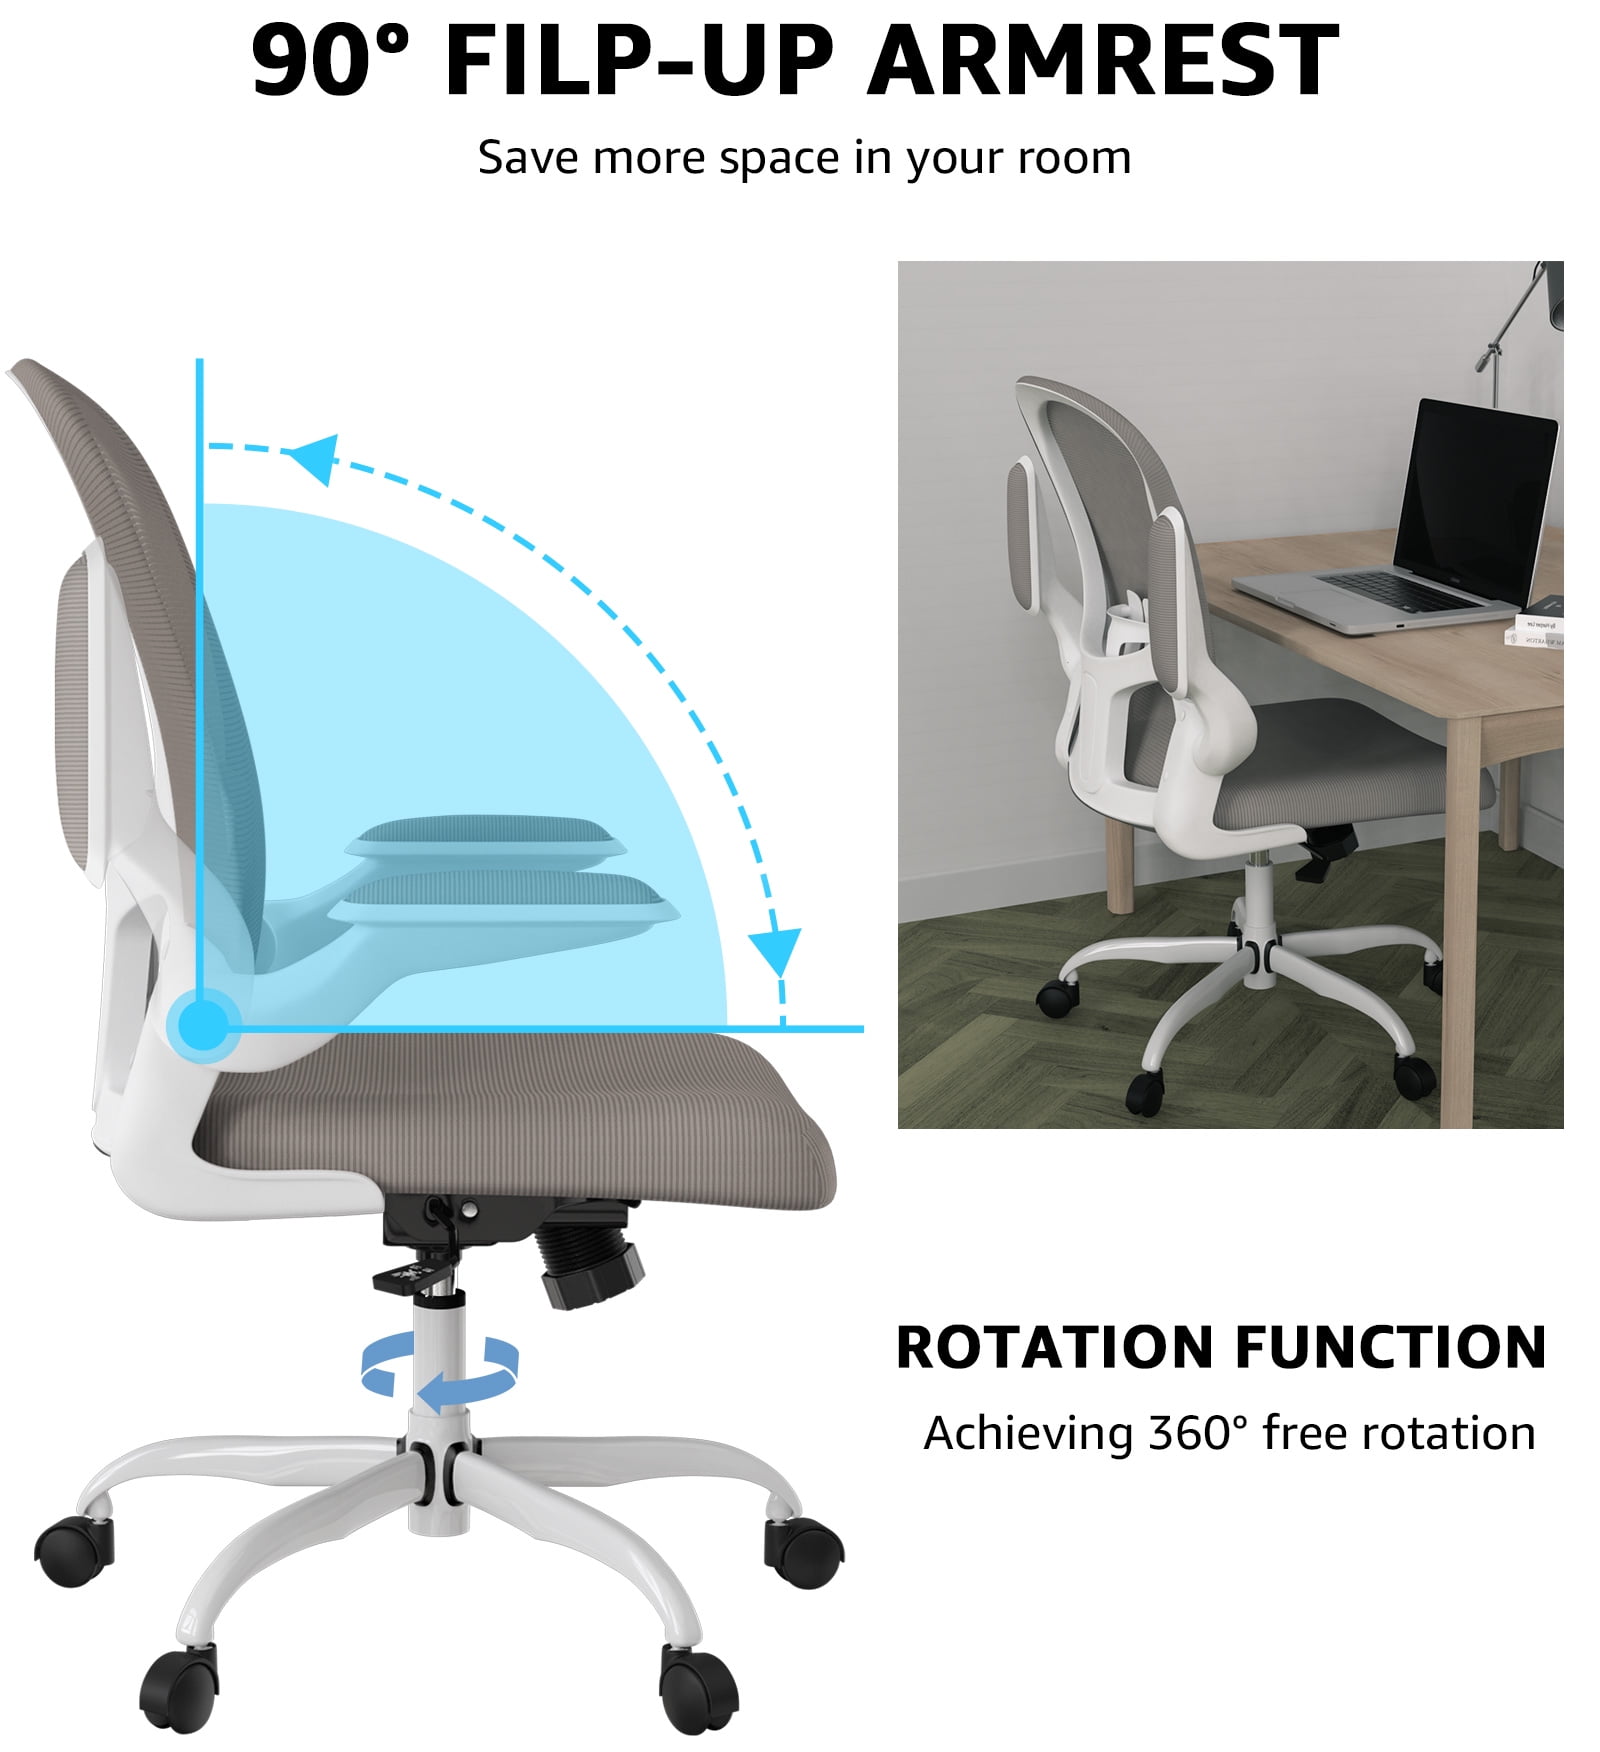 bonVIVO Standing Desk Chair - Ergonomic Chair for Tall Office Desks w/Back  Support and Handles for Posture and Balance - Work from Home High Stool 